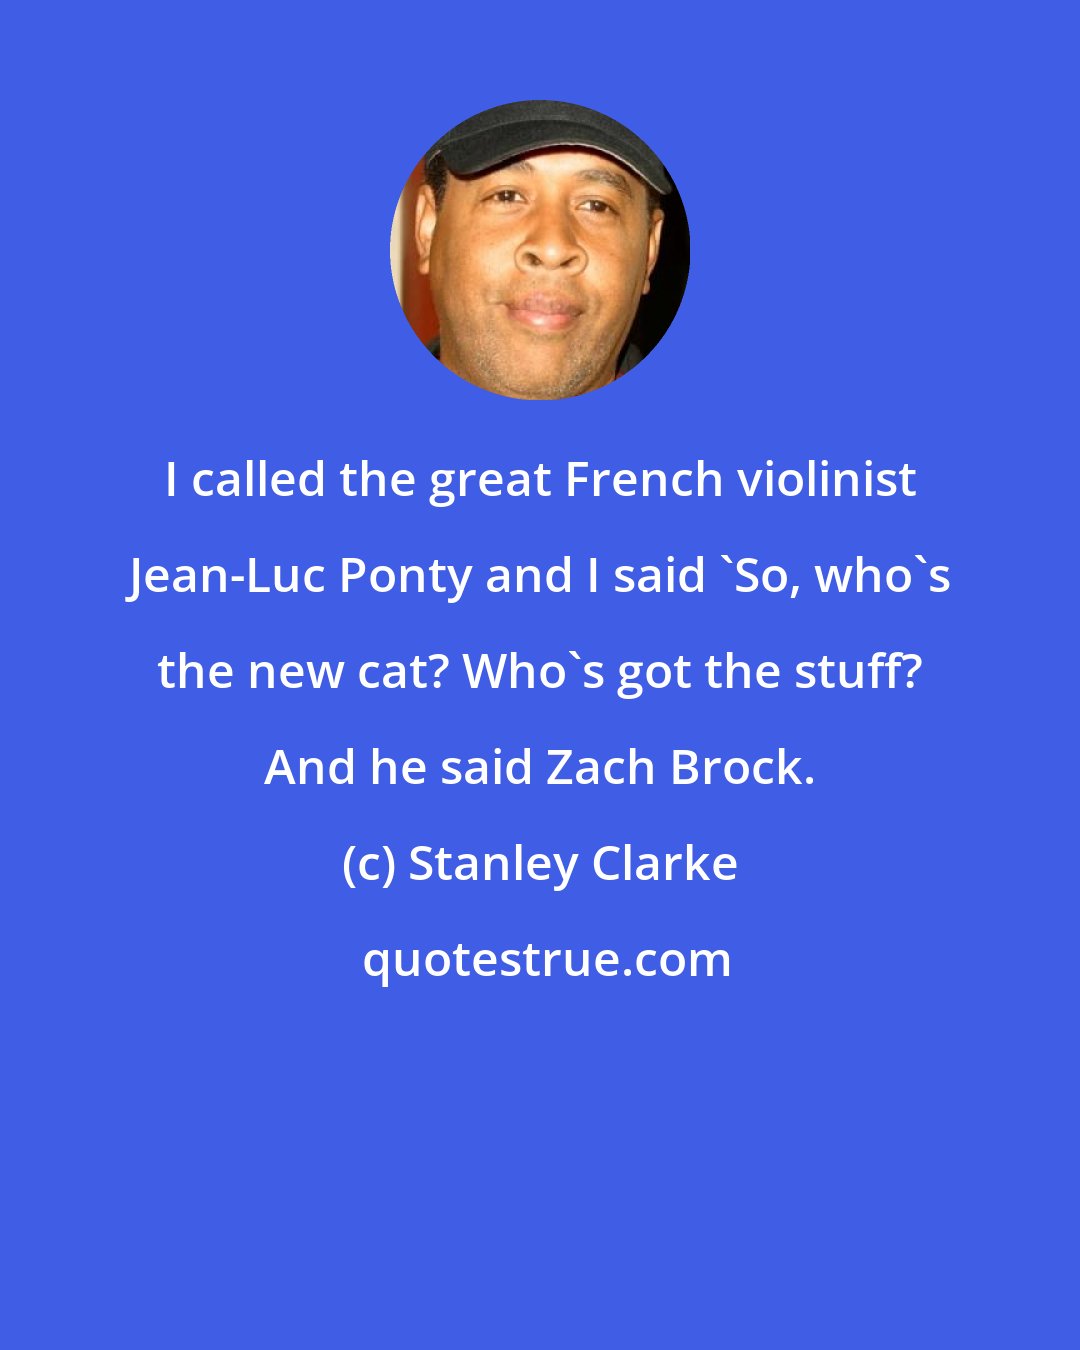 Stanley Clarke: I called the great French violinist Jean-Luc Ponty and I said 'So, who's the new cat? Who's got the stuff? And he said Zach Brock.